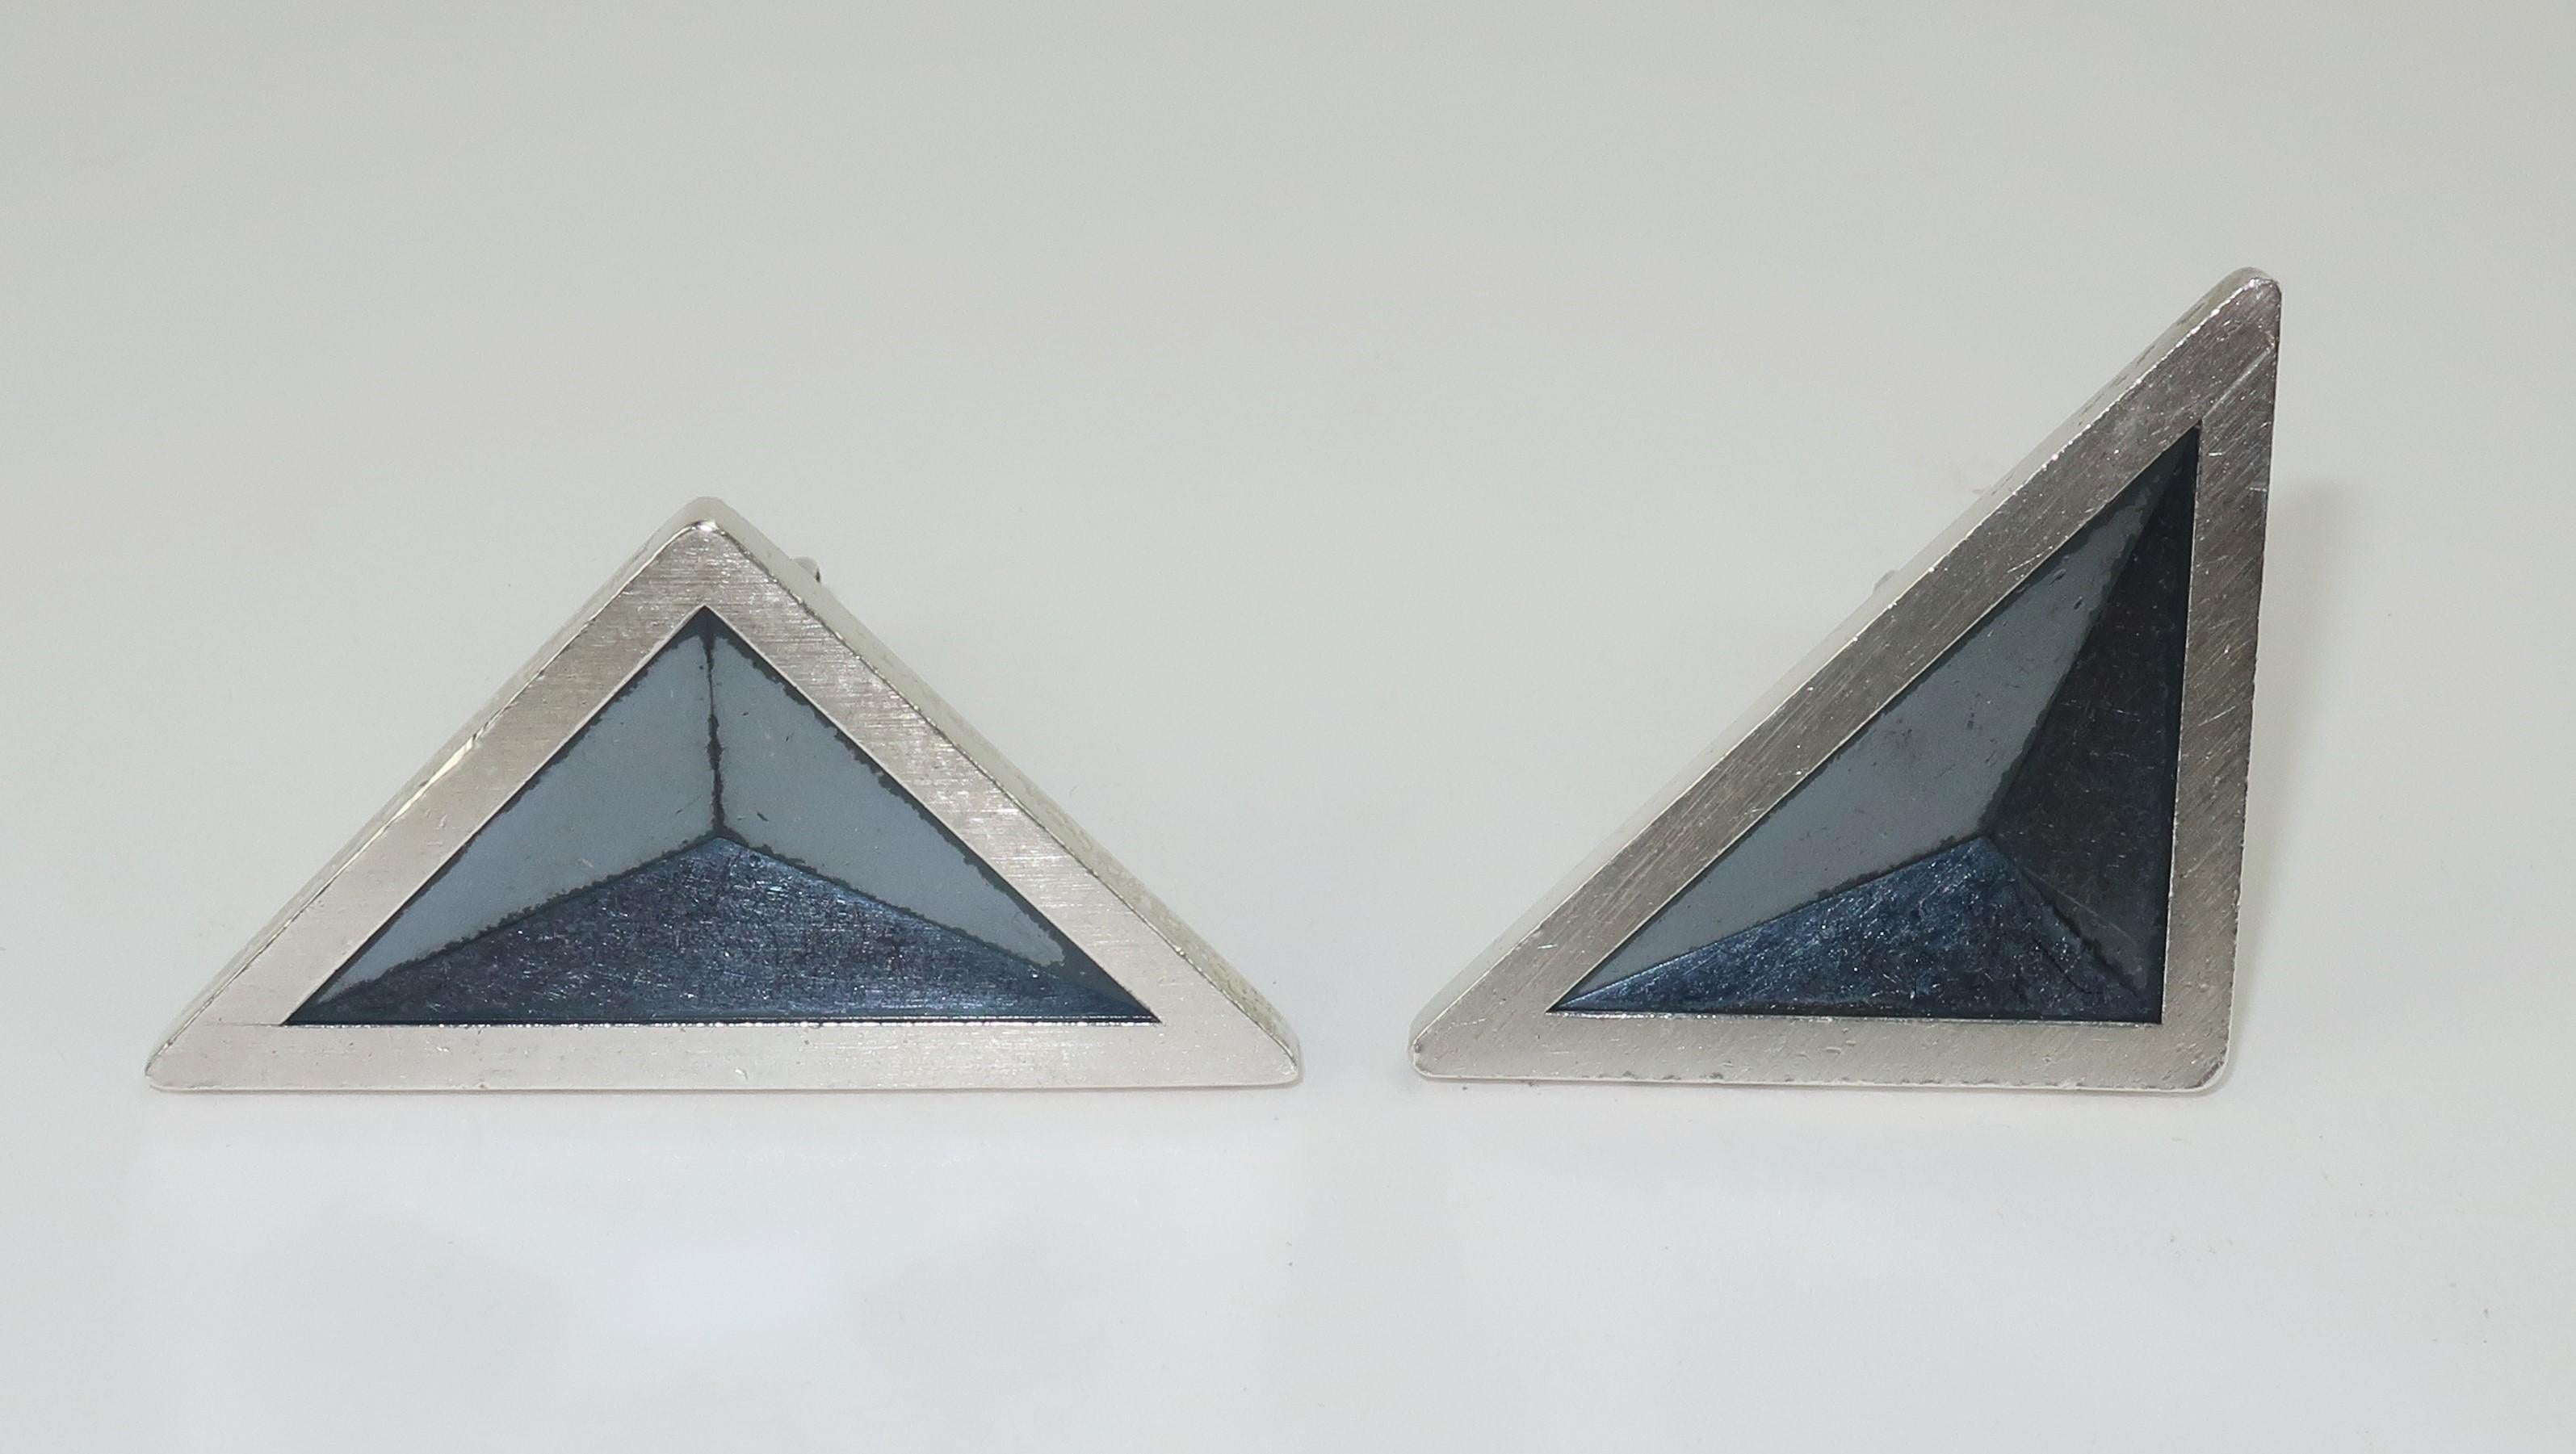 Dunhill sterling silver modernist cufflinks in a triangular shape with an oxidized cubist recess that adds style and dimension to the look.  Marked 'Dunhill' and 'Sterling' at the back.
CONDITION
Good to fair condition with visible surface